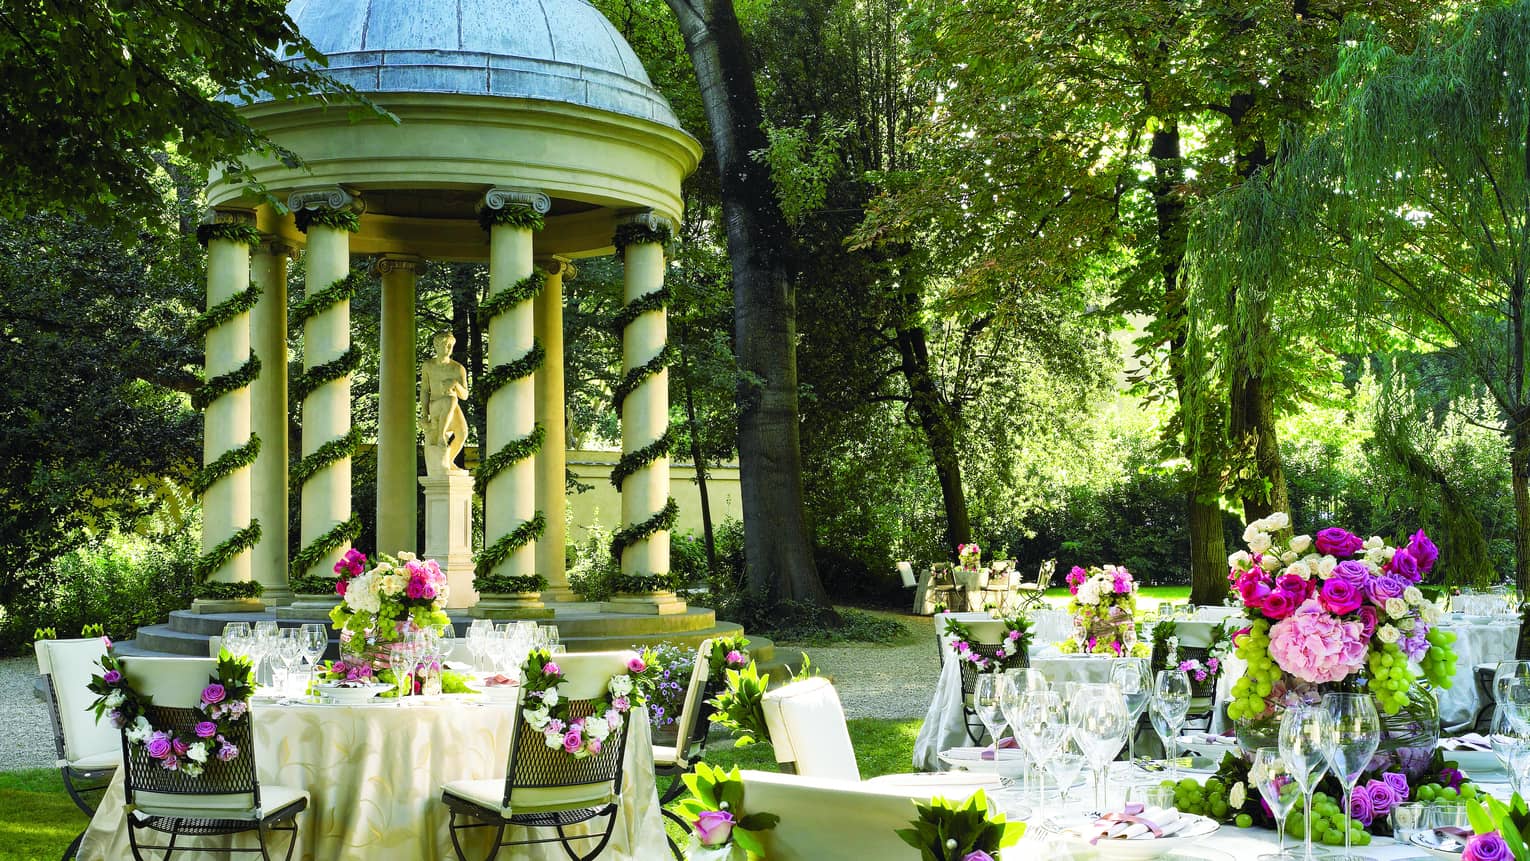 Garden reception, round, flower covered banquet tables by gazebo with white pillars